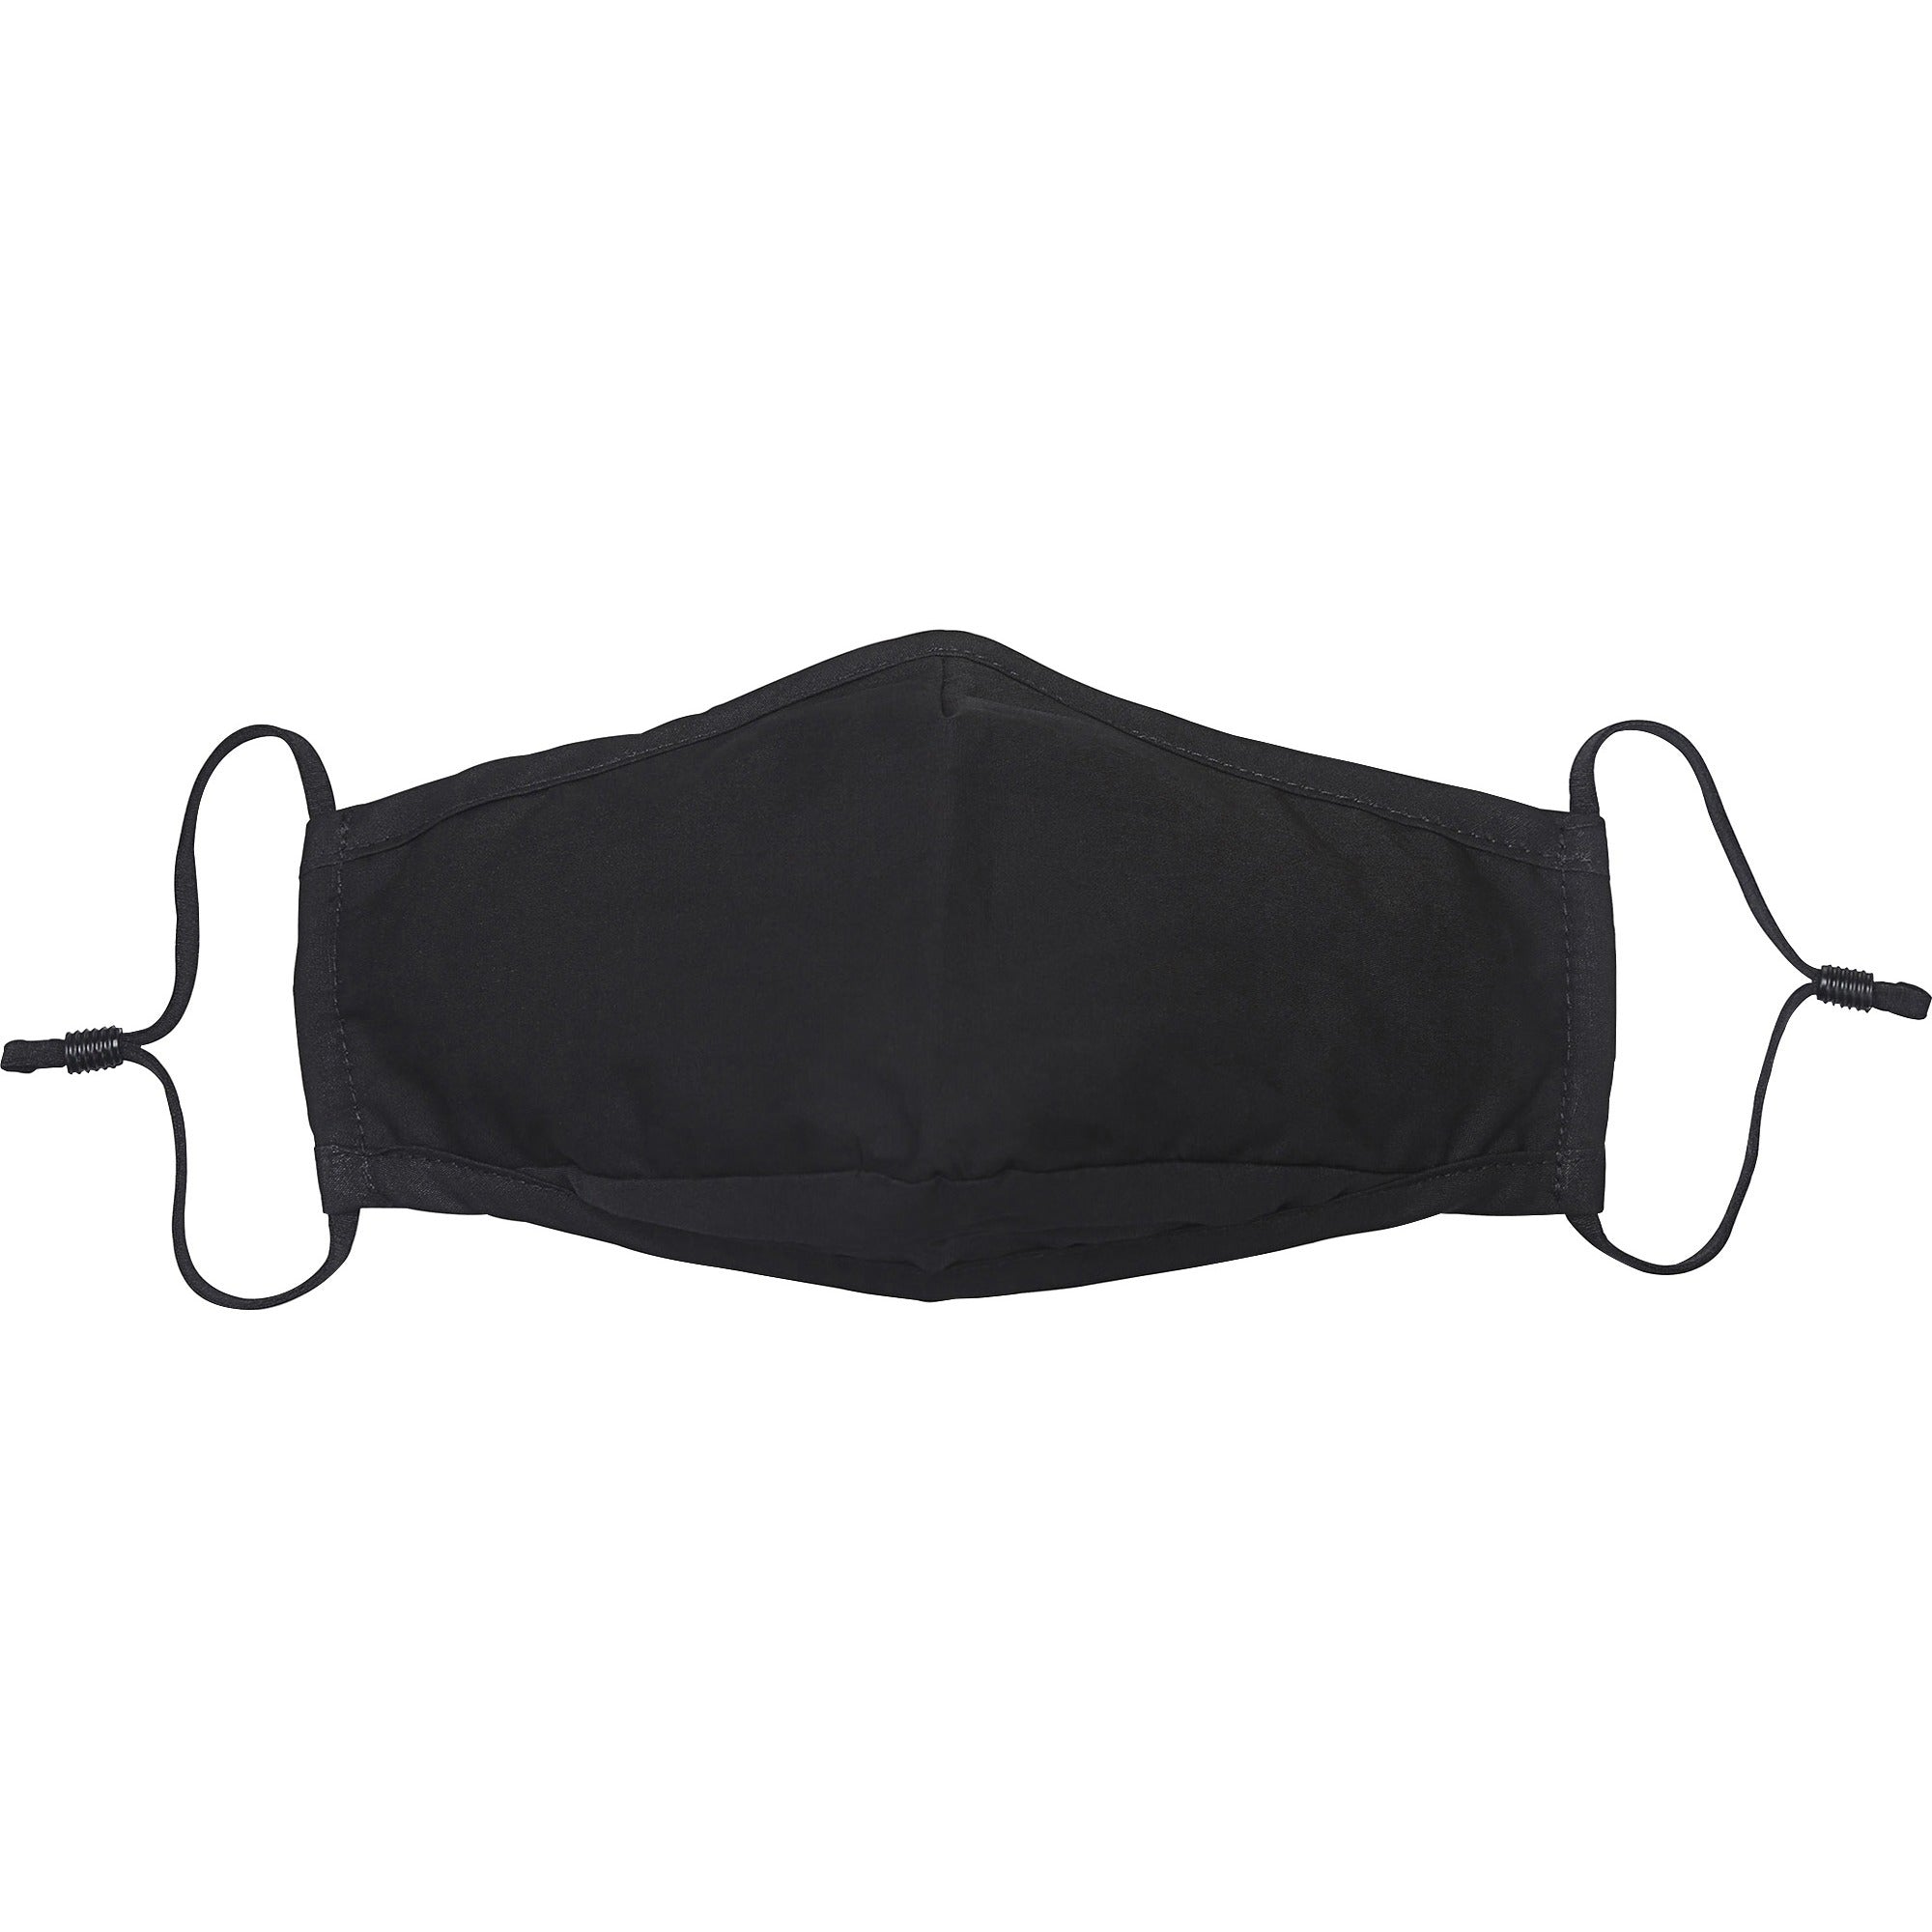 PBT Special Buy Fabric Face Masks - Recommended for: Face - Adult Size - Respiratory Droplet Protection - Fabric, Cotton - Black - 3-layered, Nose Clip, Adjustable Ear Loop, Comfortable, Washable, Filter Pocket - 1 Bag